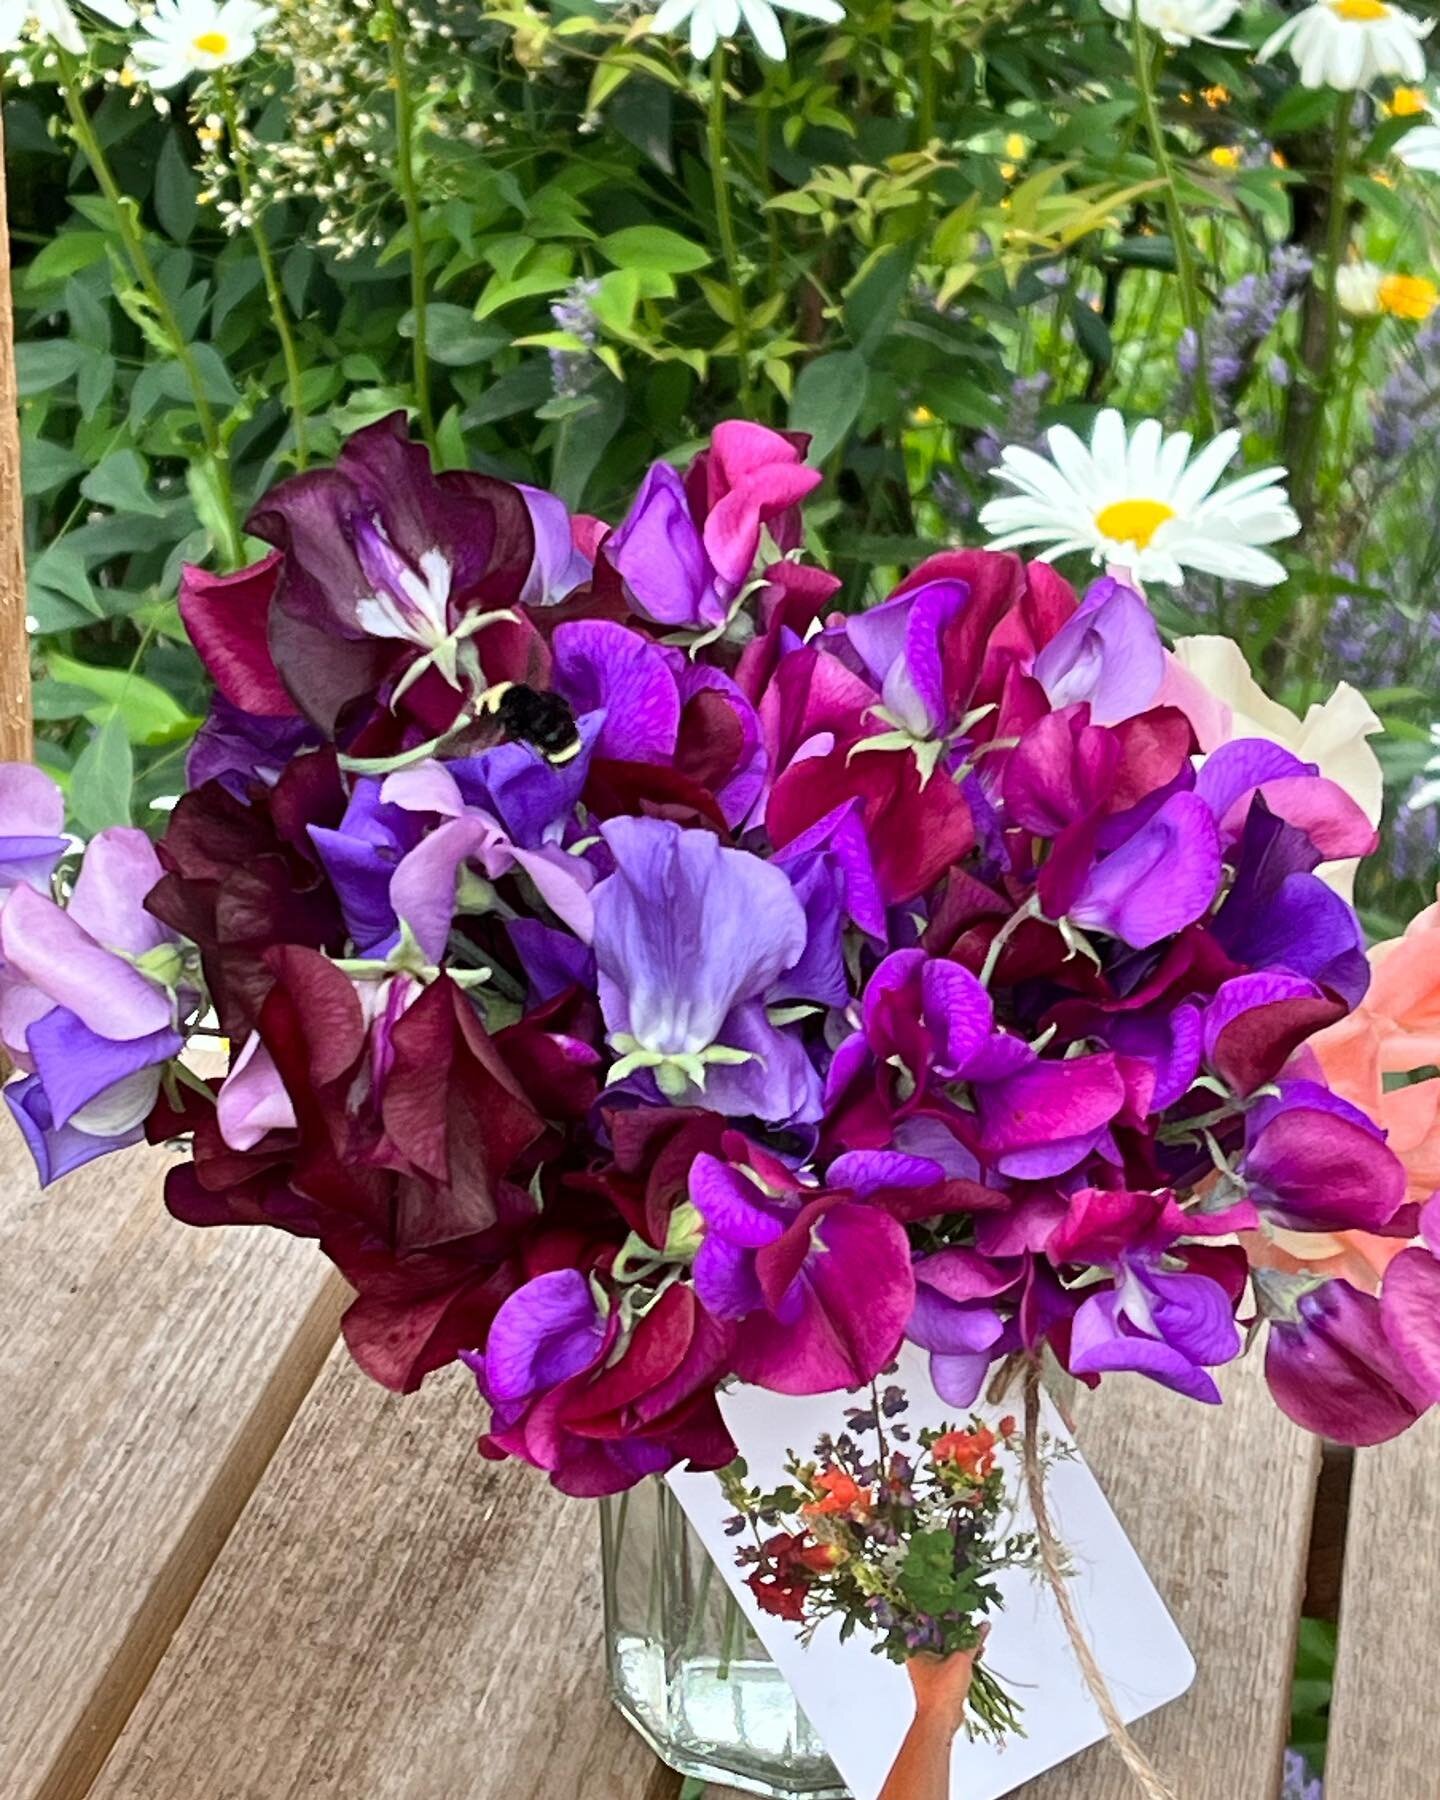 Flower stand is open! $10 for sweet peas. The sweet pea season is almost over so if you haven&rsquo;t sniffed these beauties you are missing out!